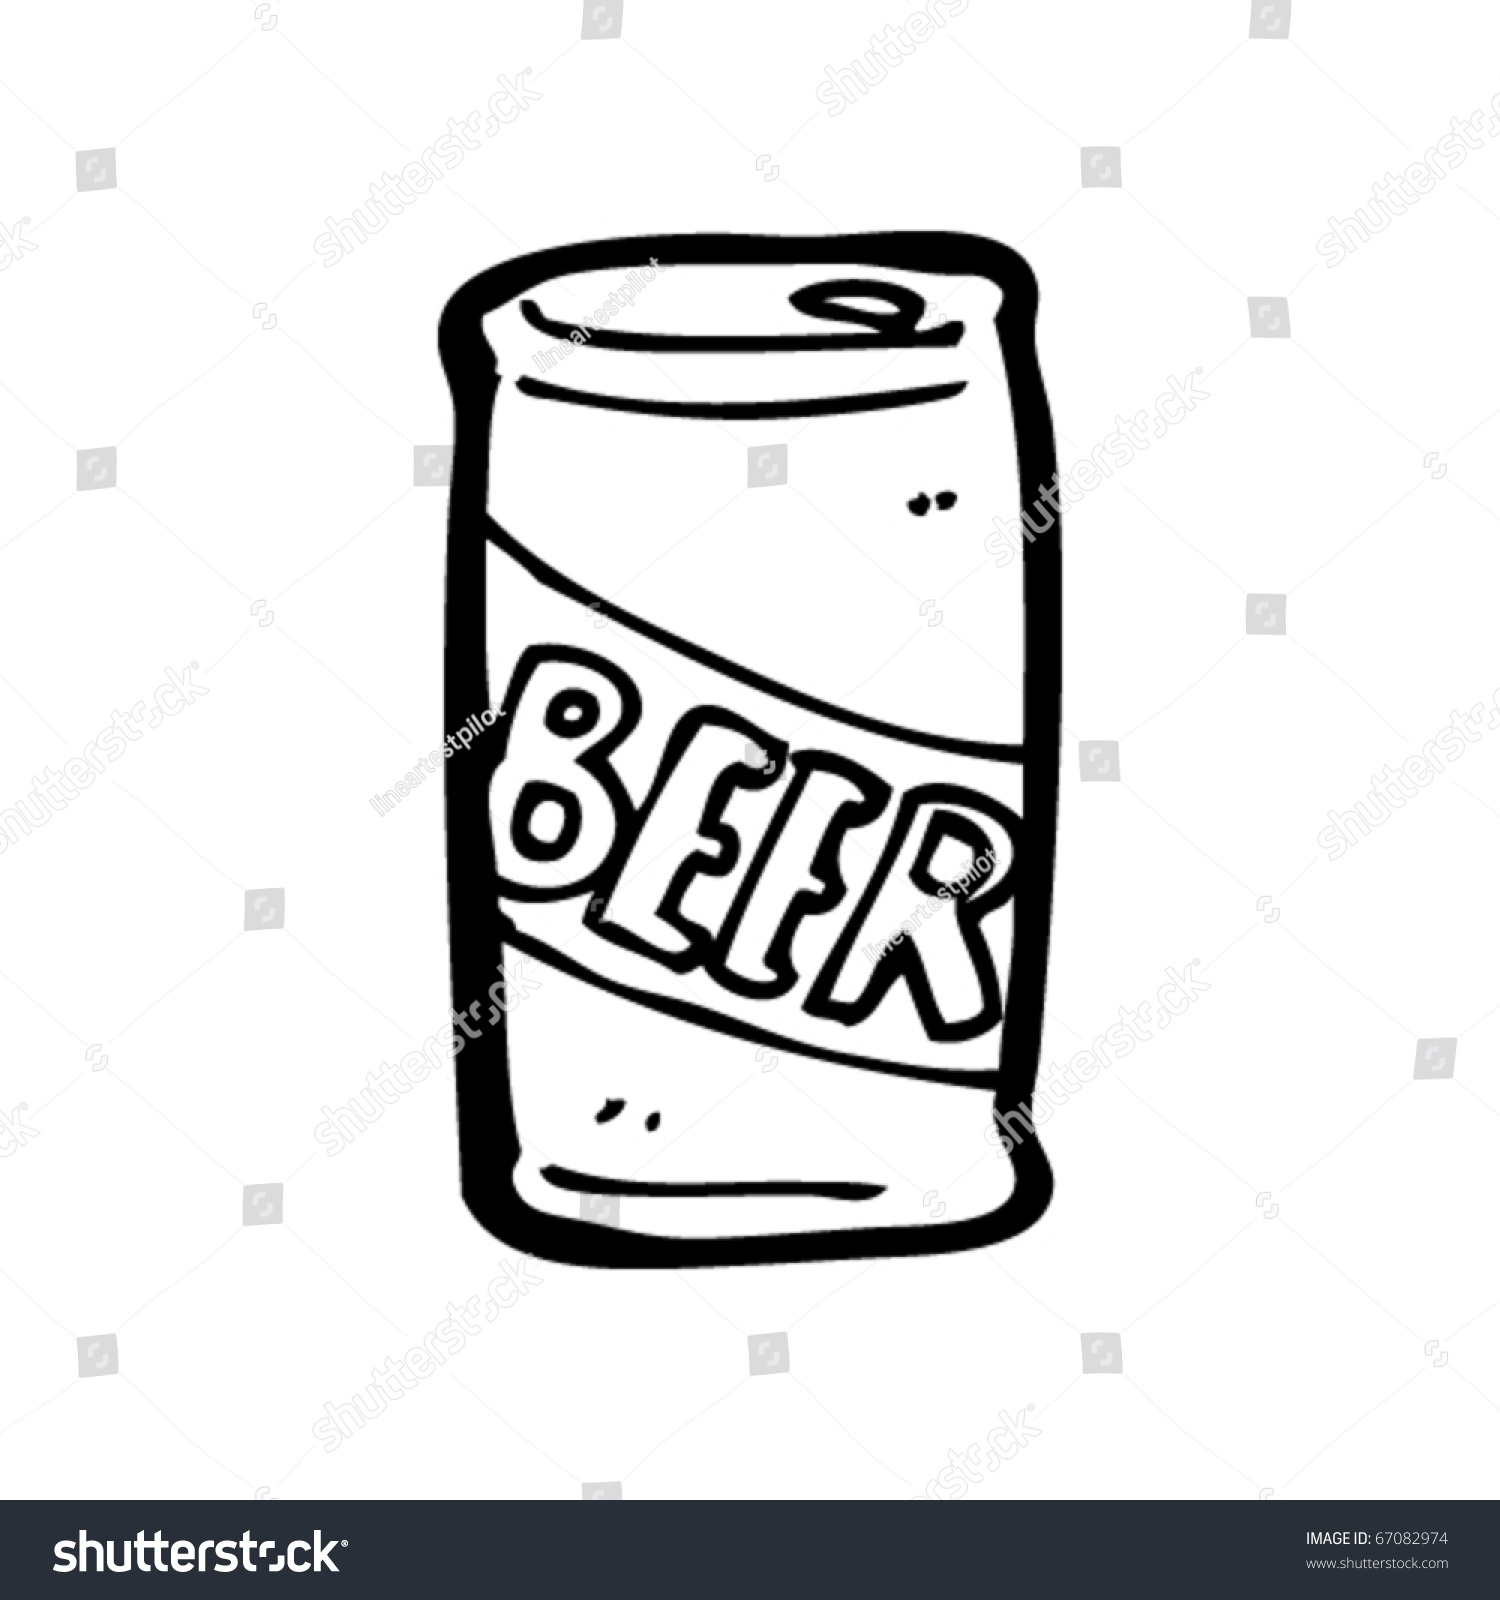 beer can clipart free - photo #38